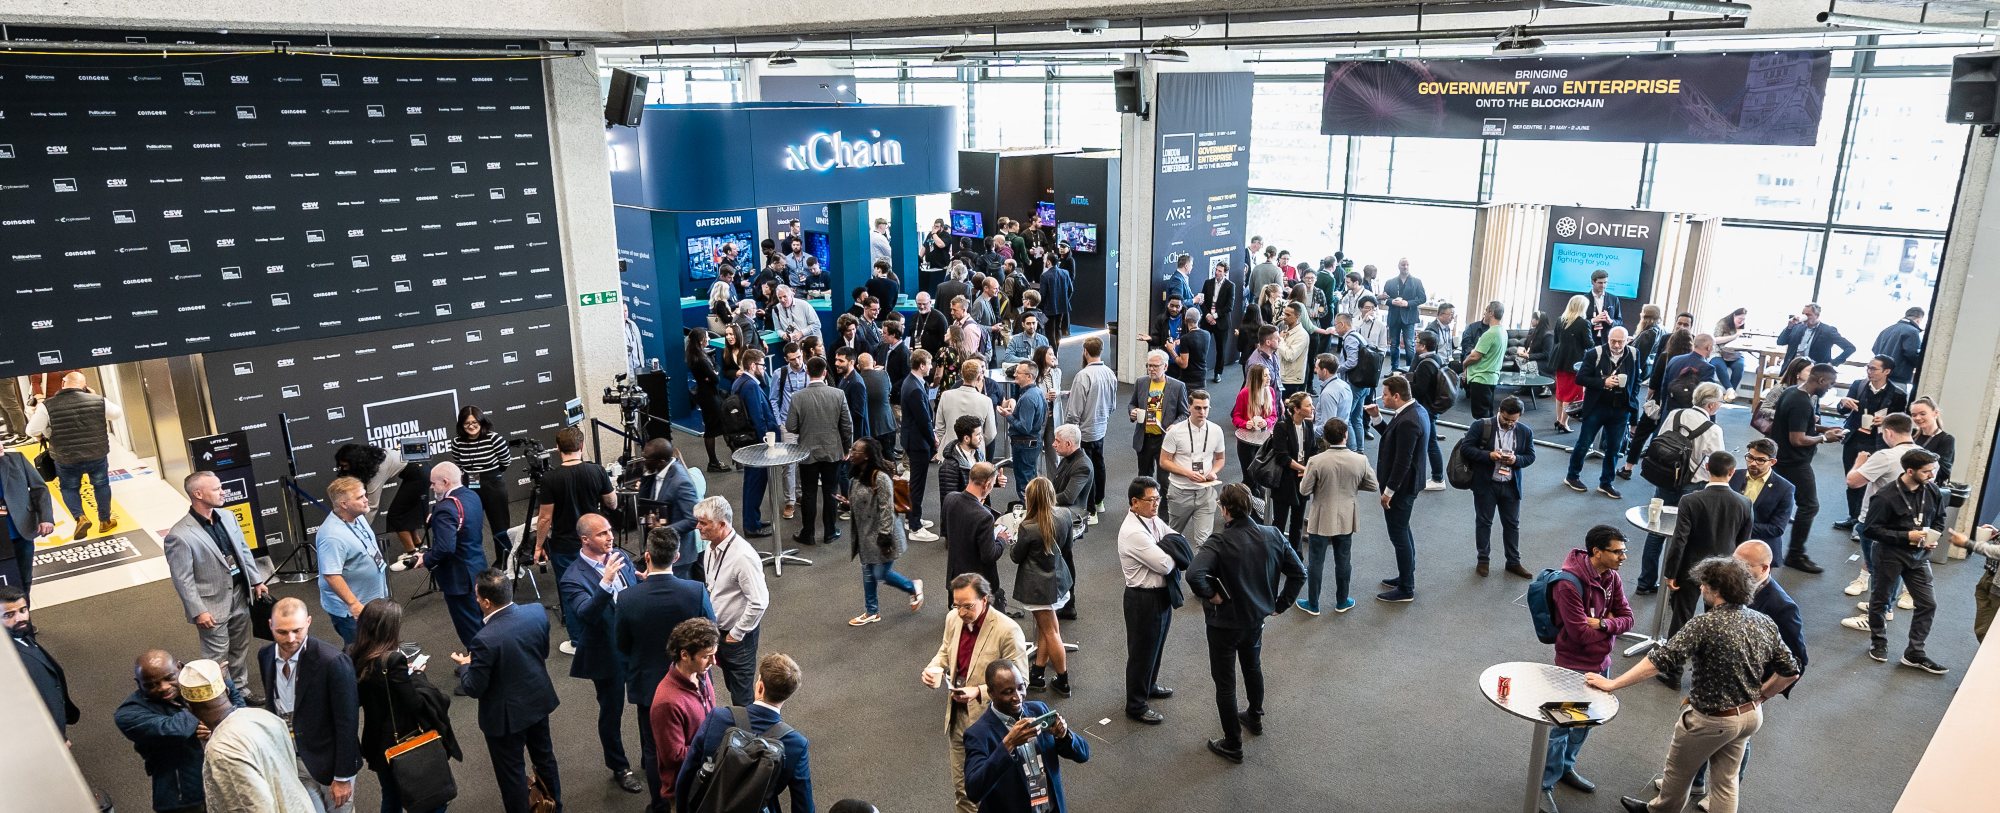 Exhibition floor at the London Blockchain Conference